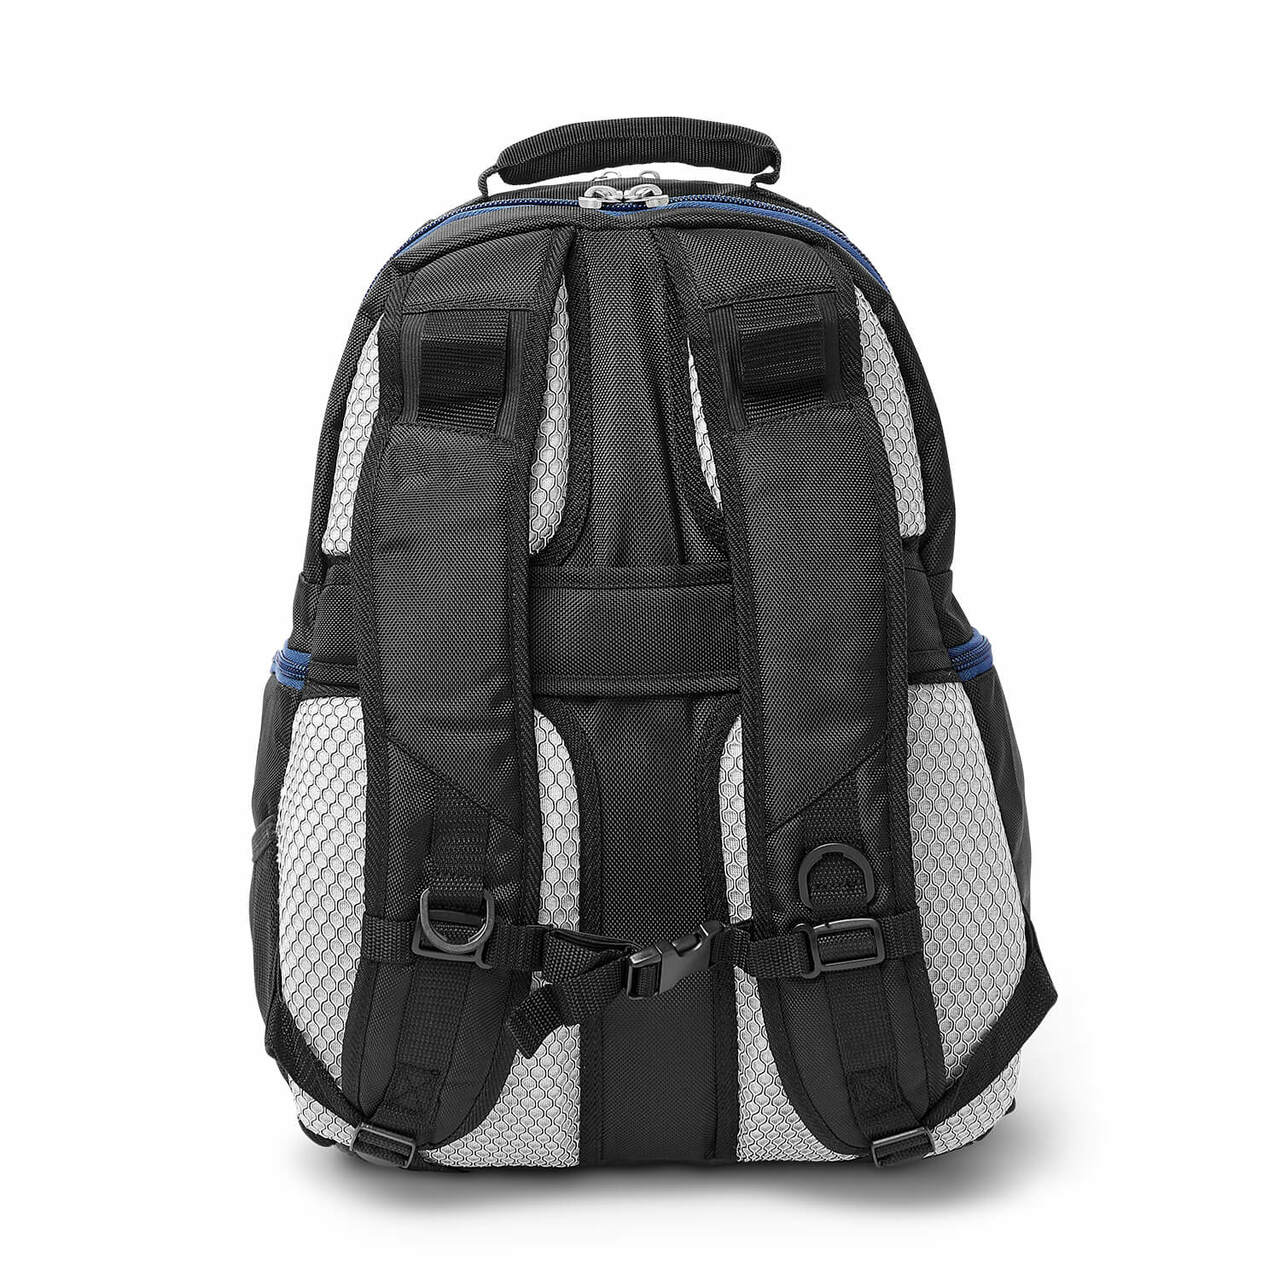 Bringham Young Laptop Backpack